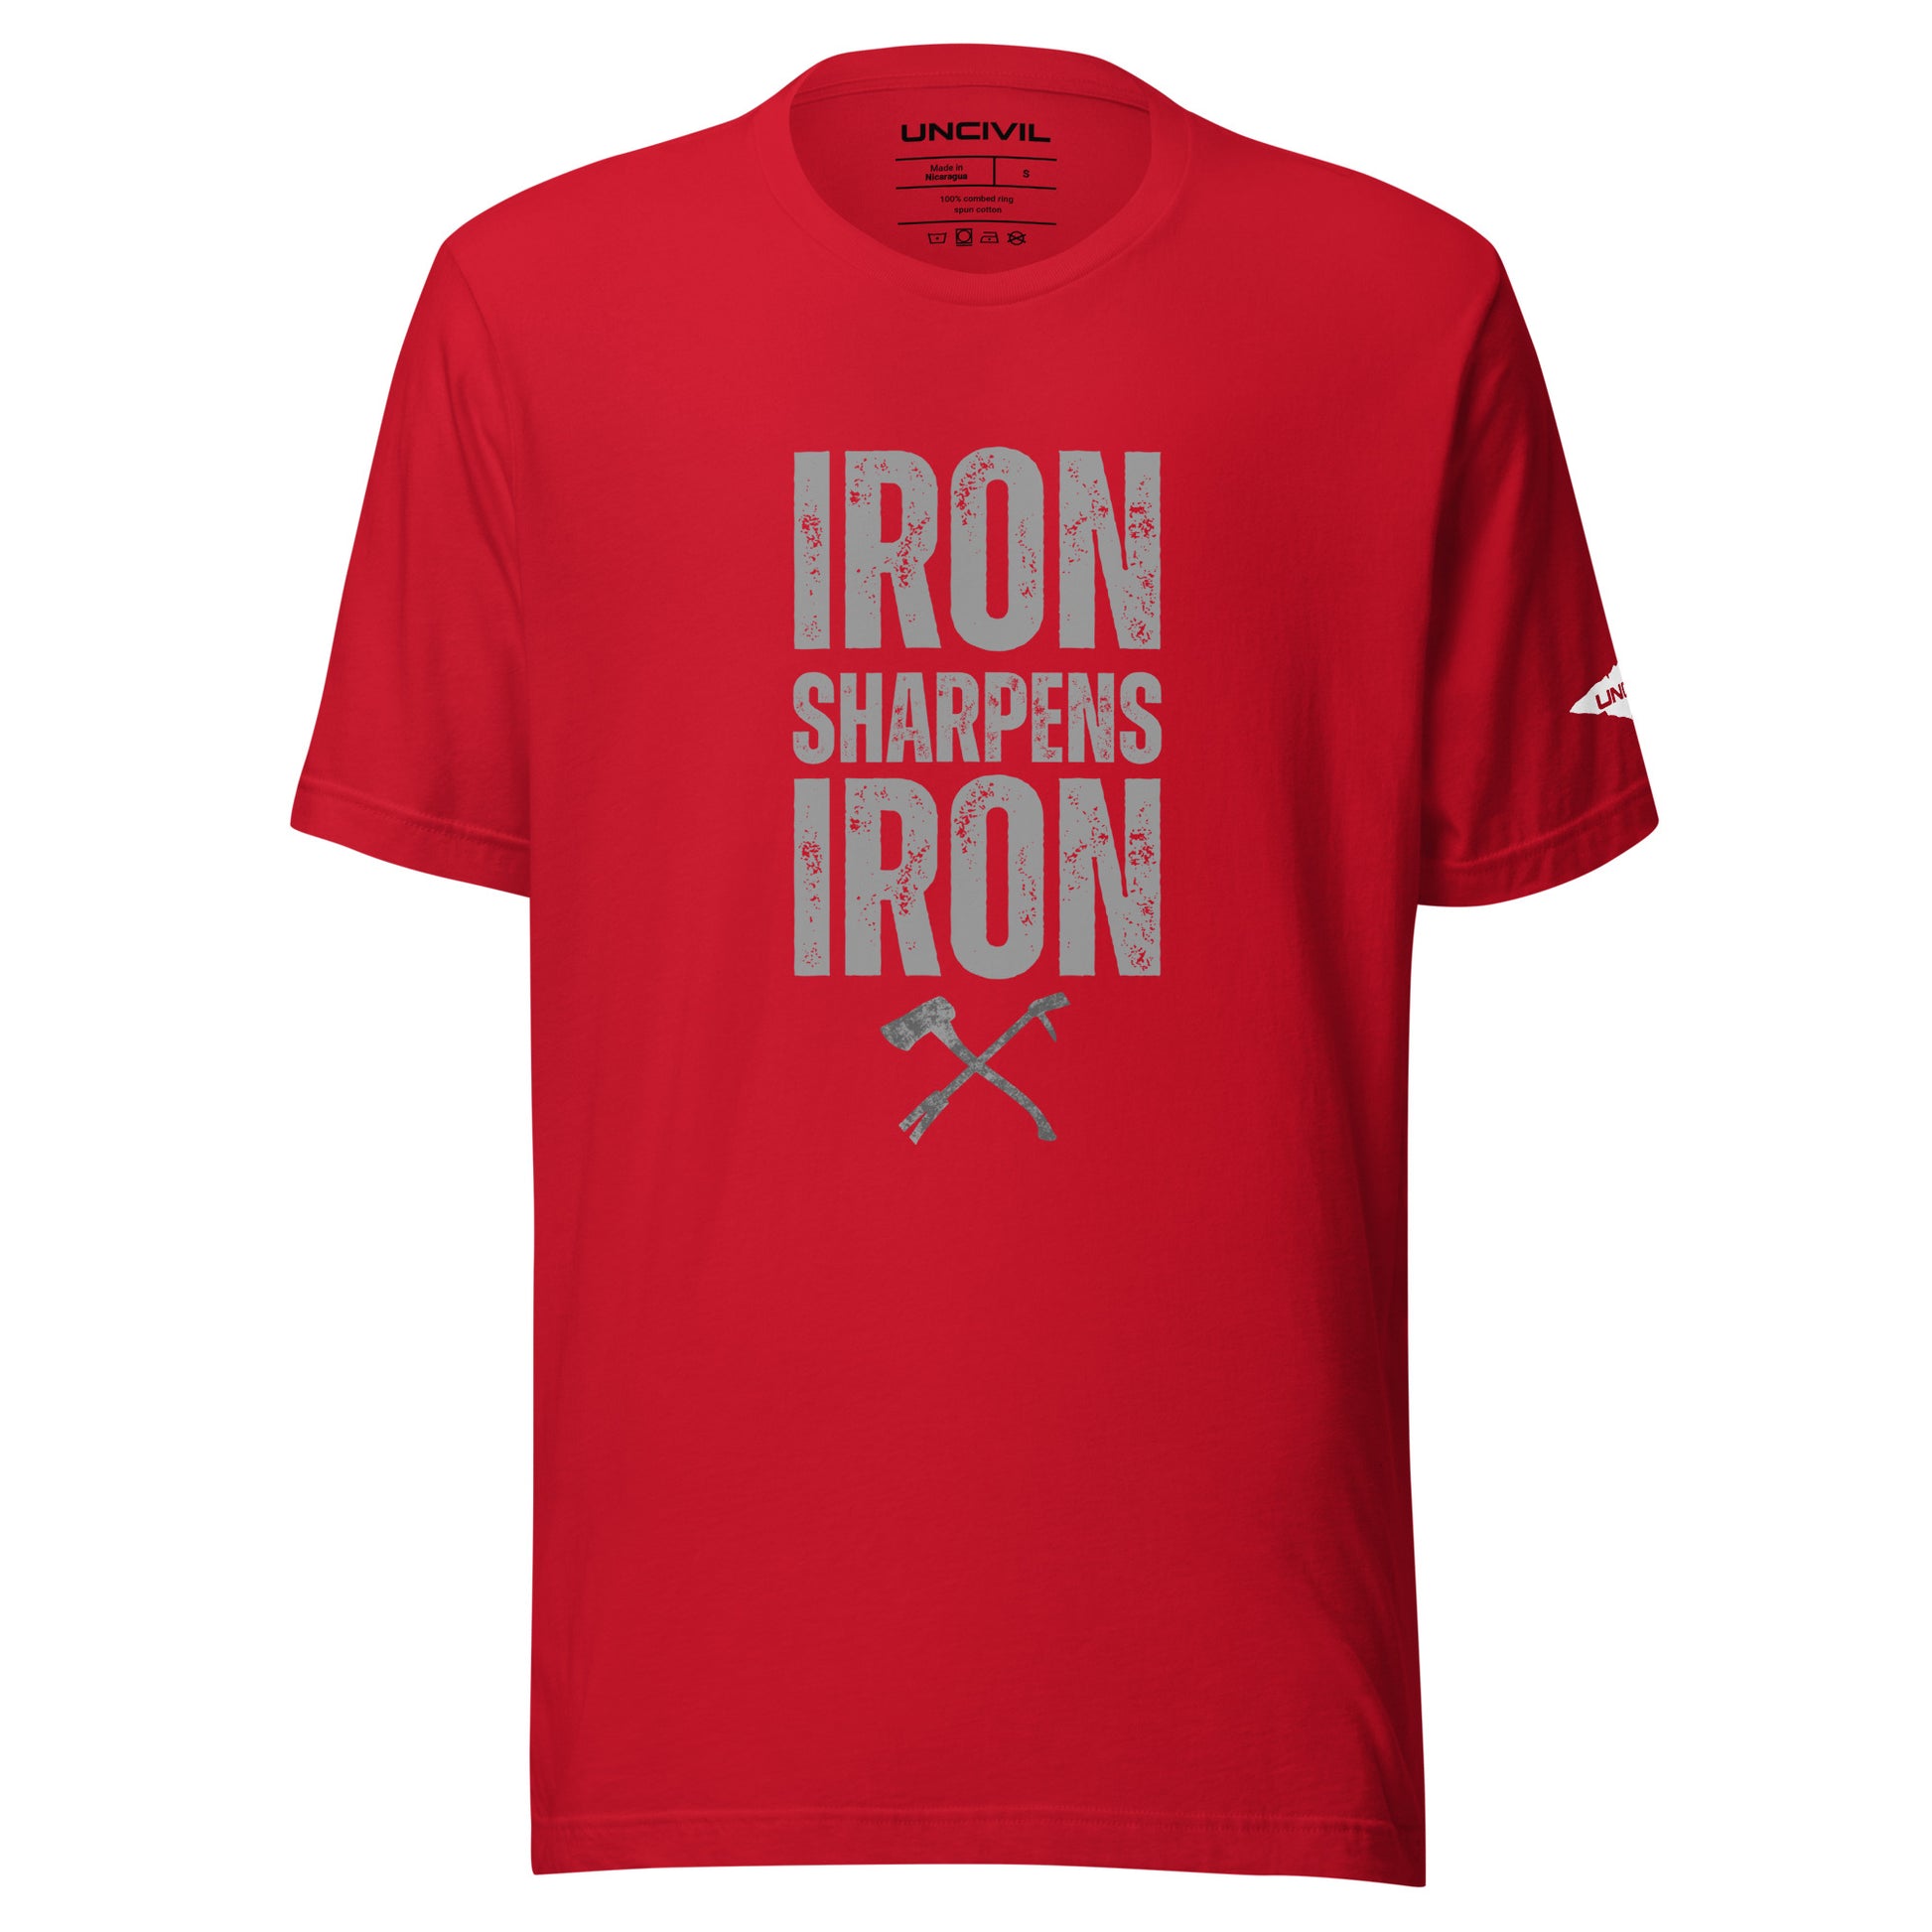 Iron Sharpens Iron Proverbs 27:17 Unisex T-shirt with a set of irons - red shirt